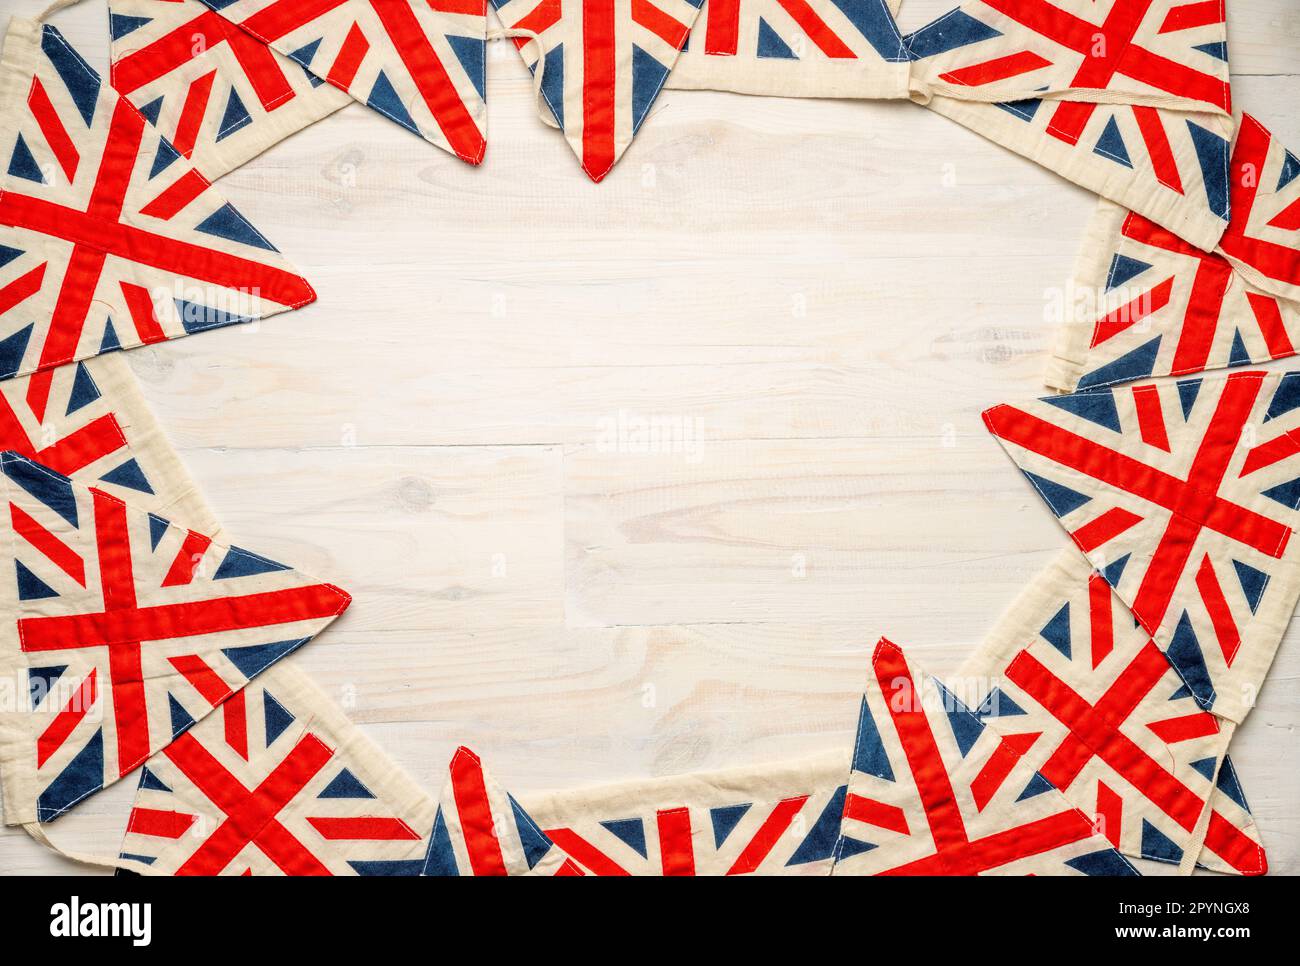 Union Jack bunting on wooden board with central copy space Stock Photo